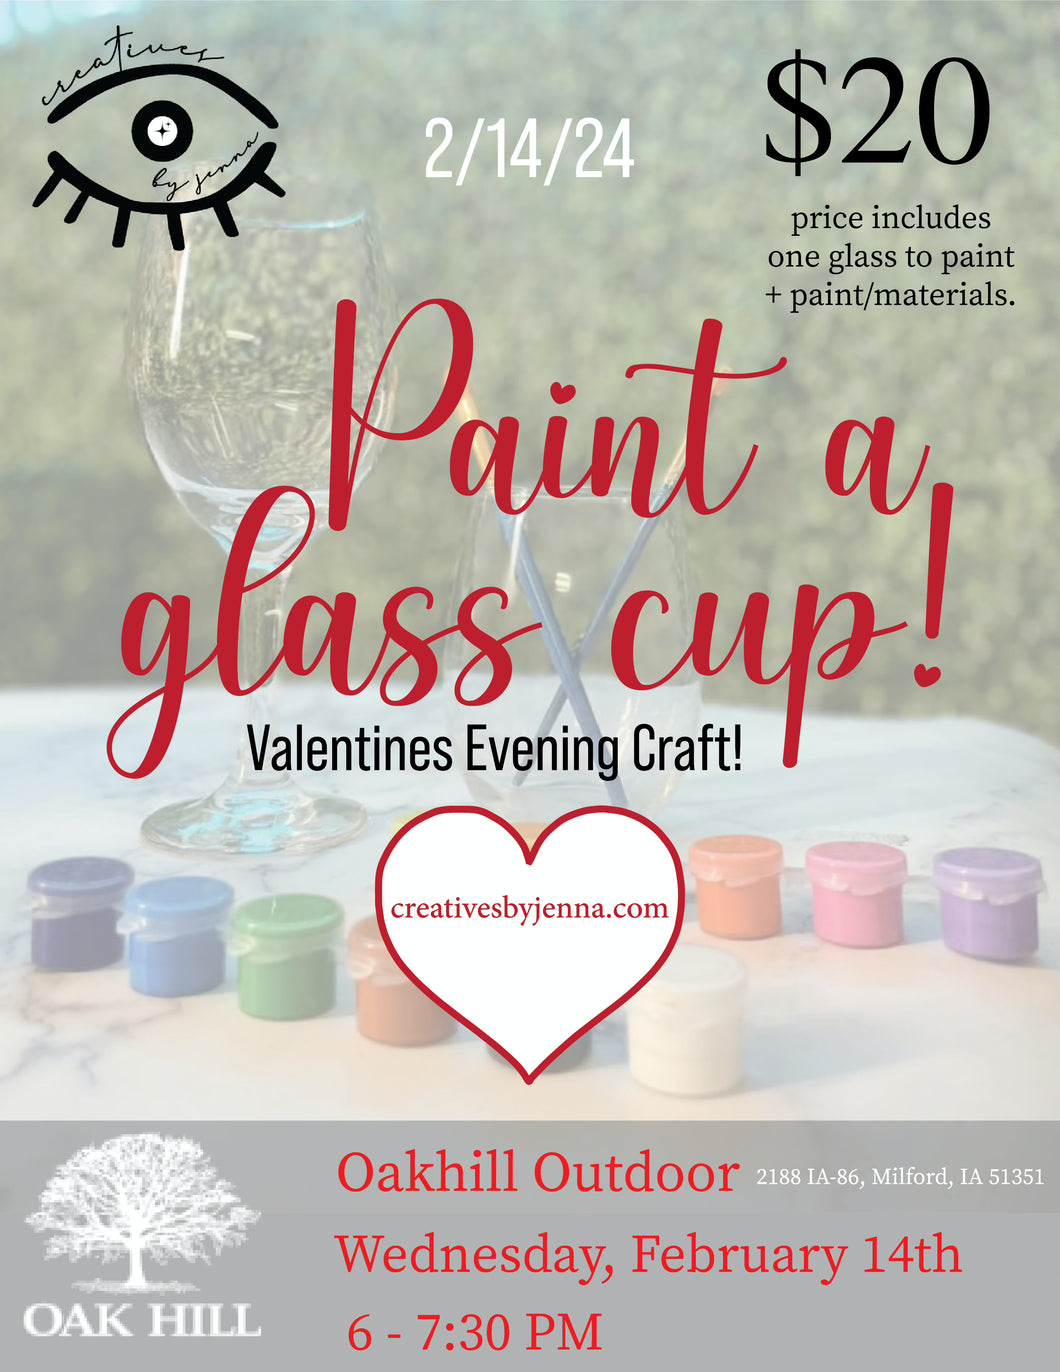 Paint a glass cup  - Valentines Evening Craft at Oakhill Outdoor 2/14/24